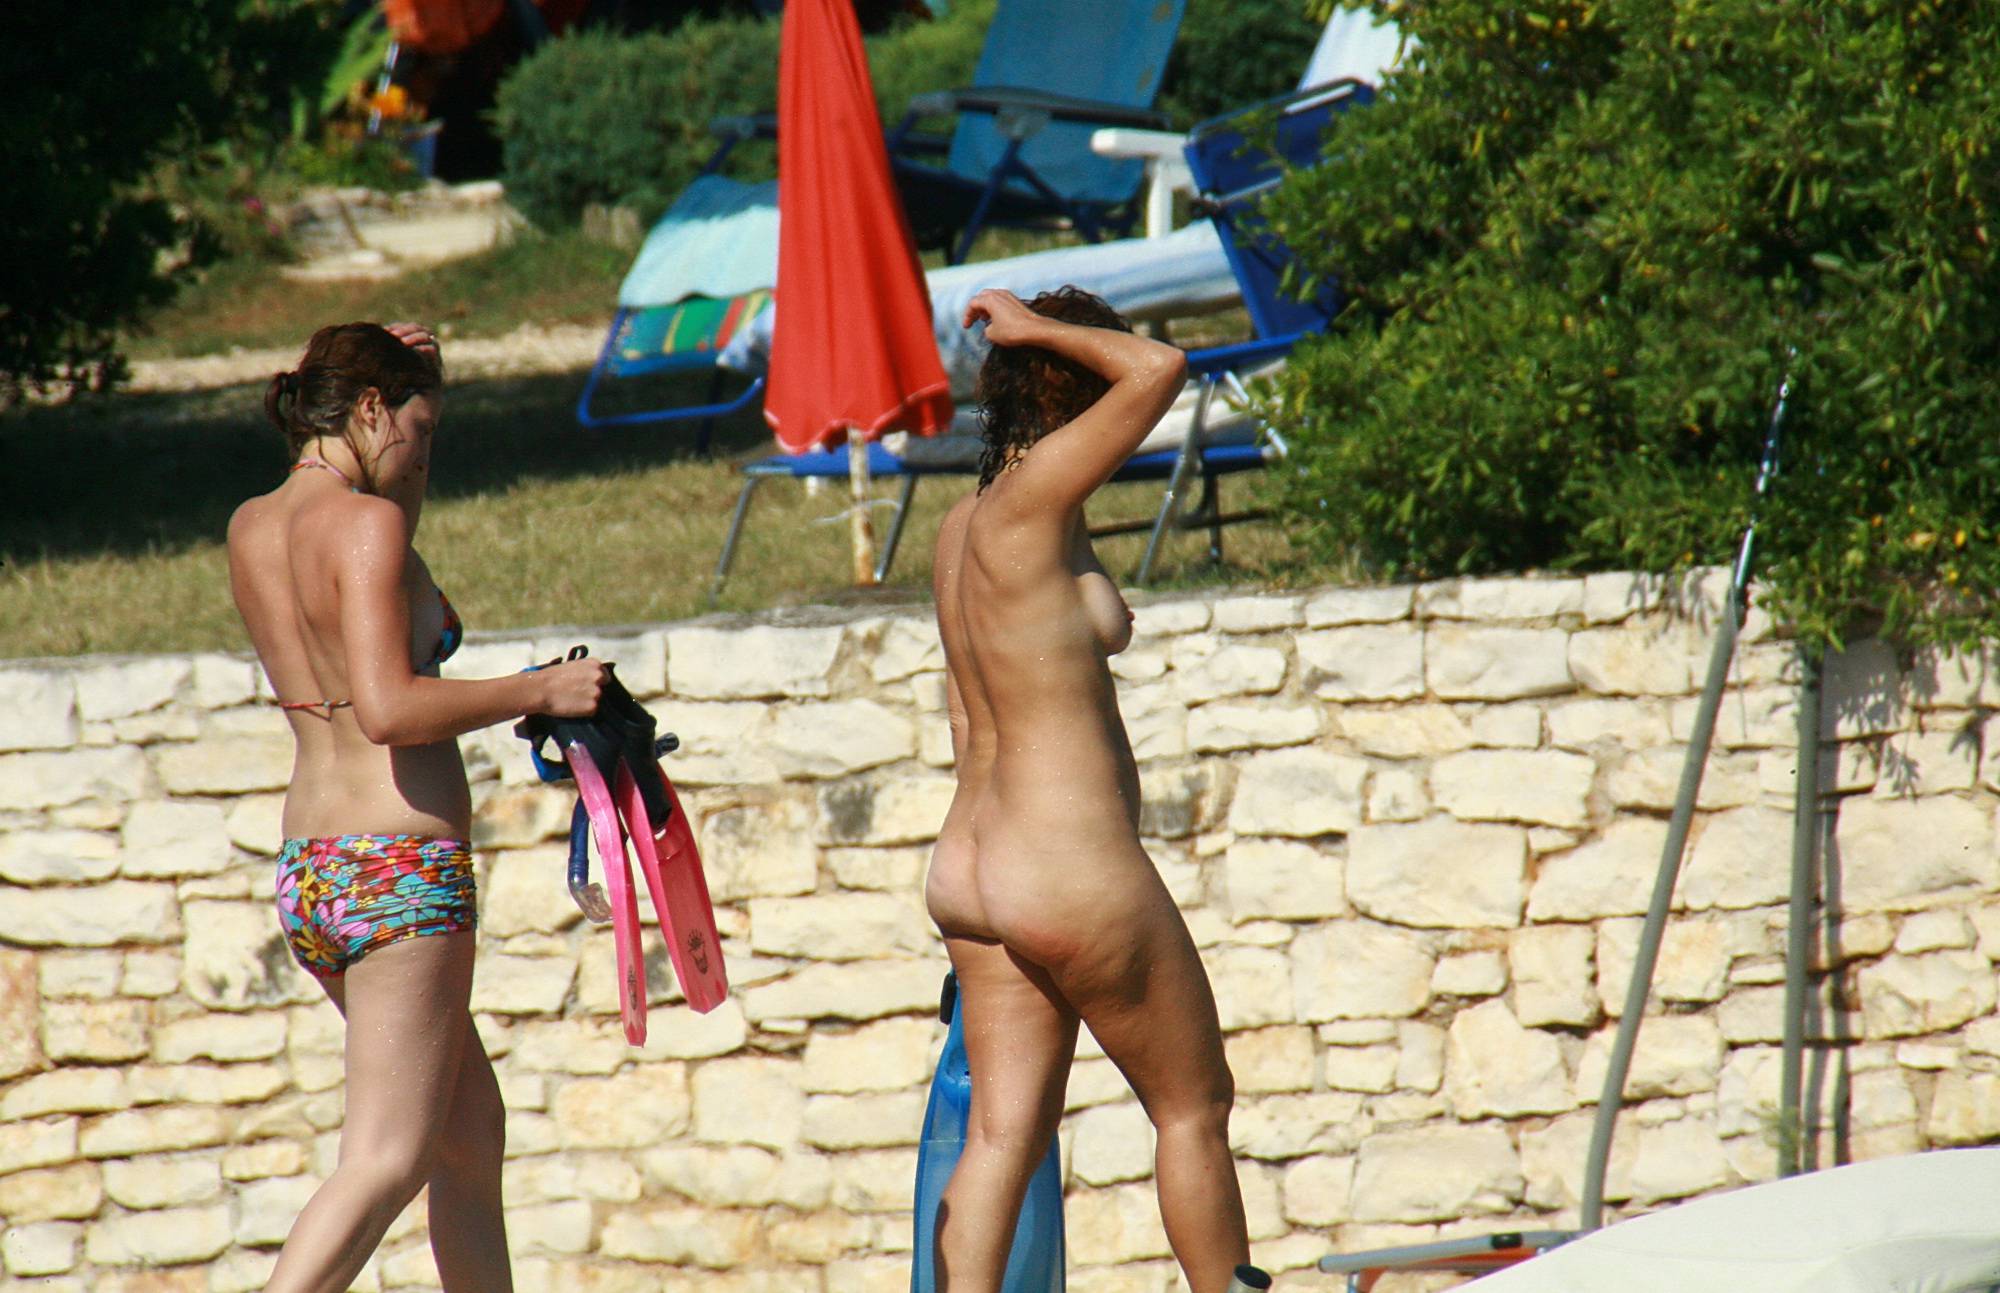 Pure Nudism Images-Natural Tanning Is Best - 2